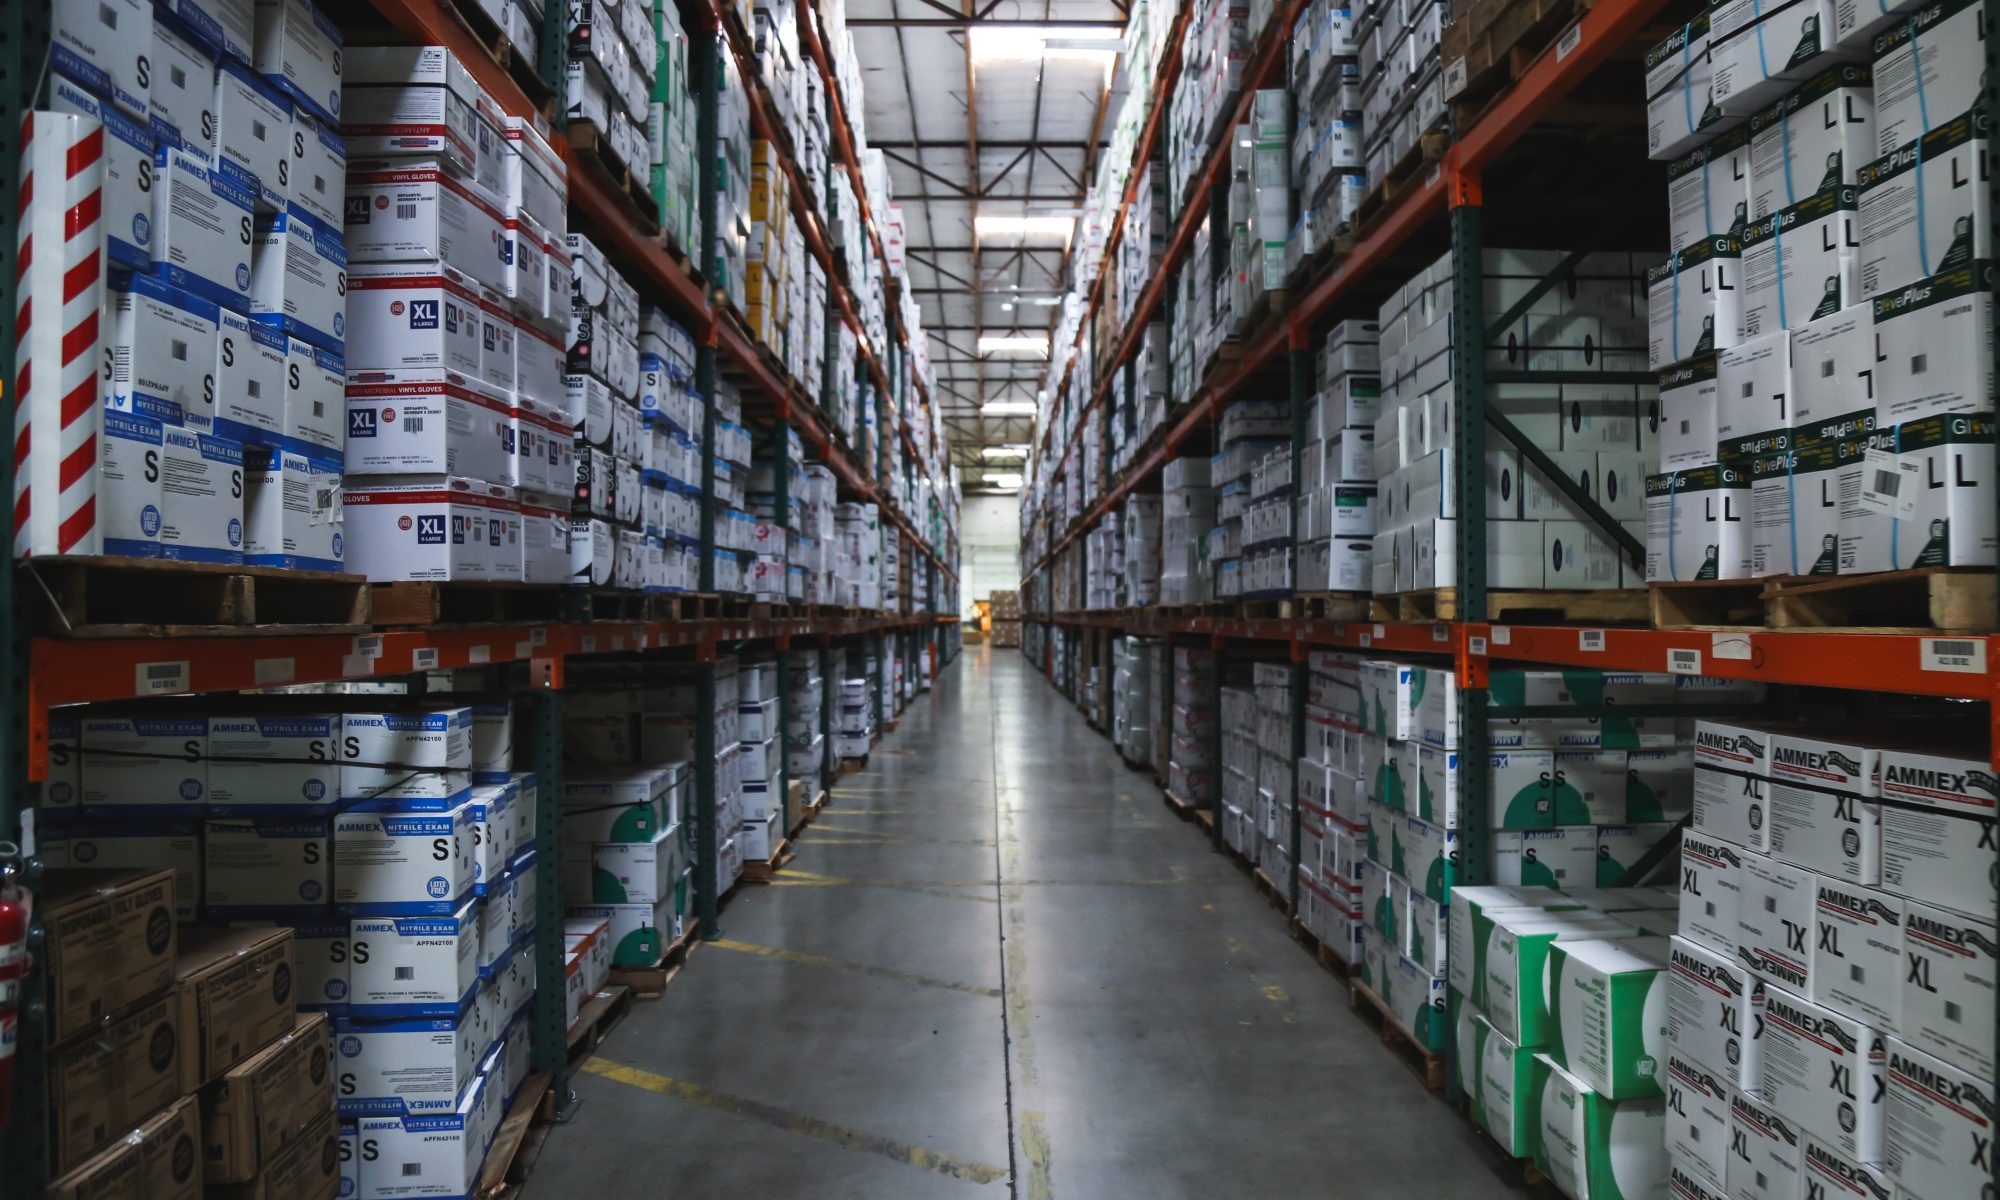 Cases of gloves line an aisle in a warehouse.